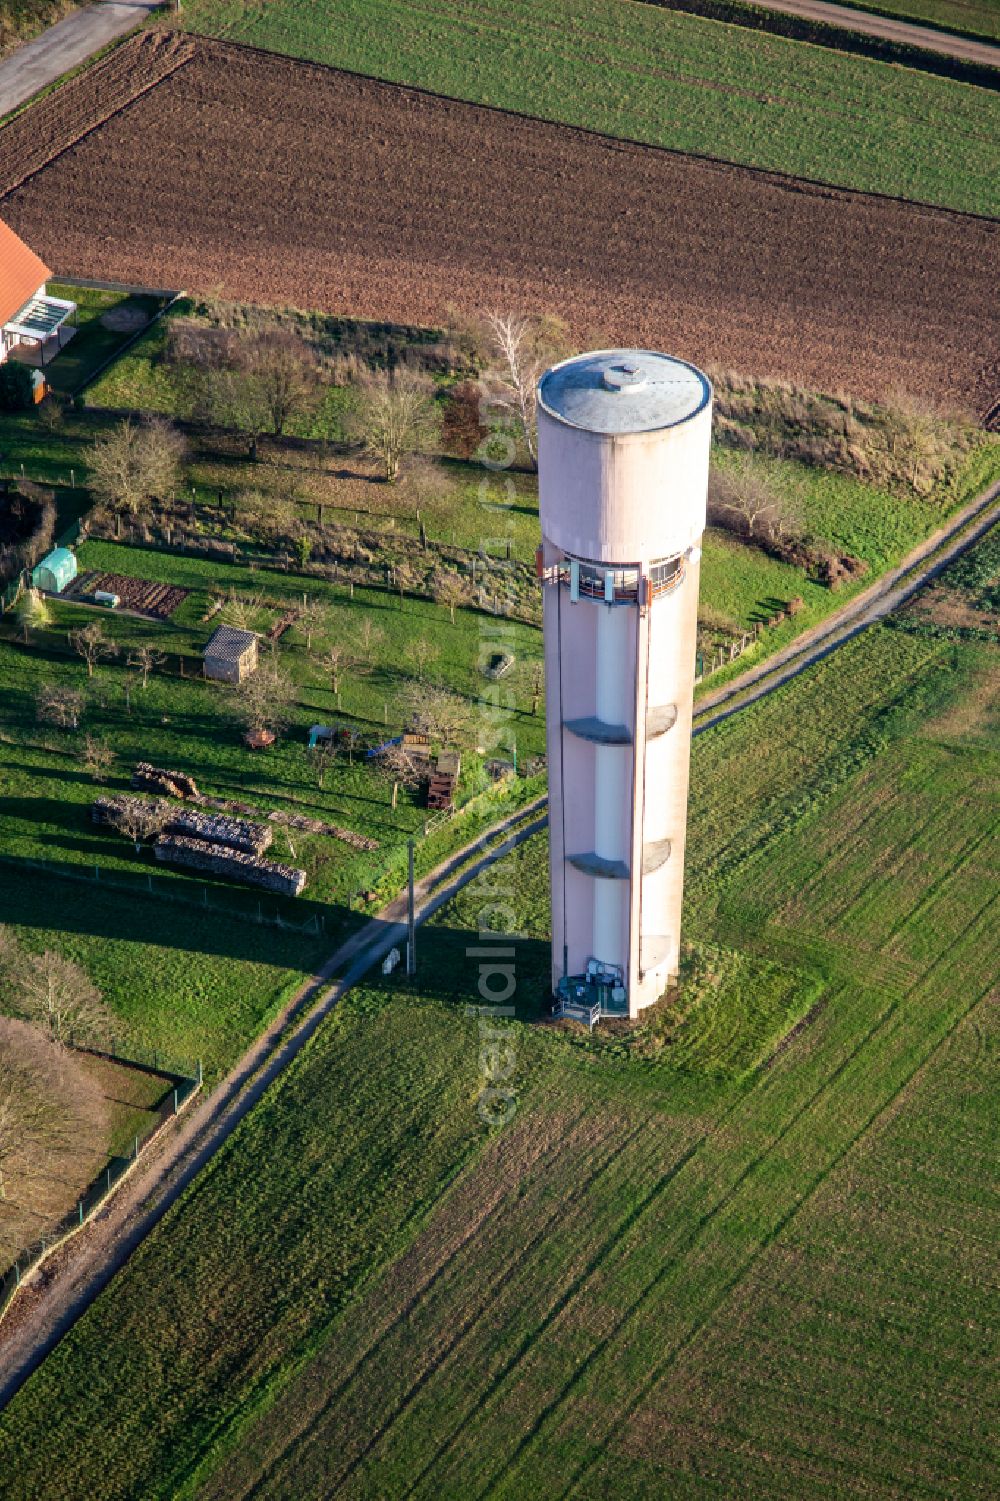 Schleithal from above - Building of industrial monument water tower Chateau d'Eau in Schleithal in Grand Est, France